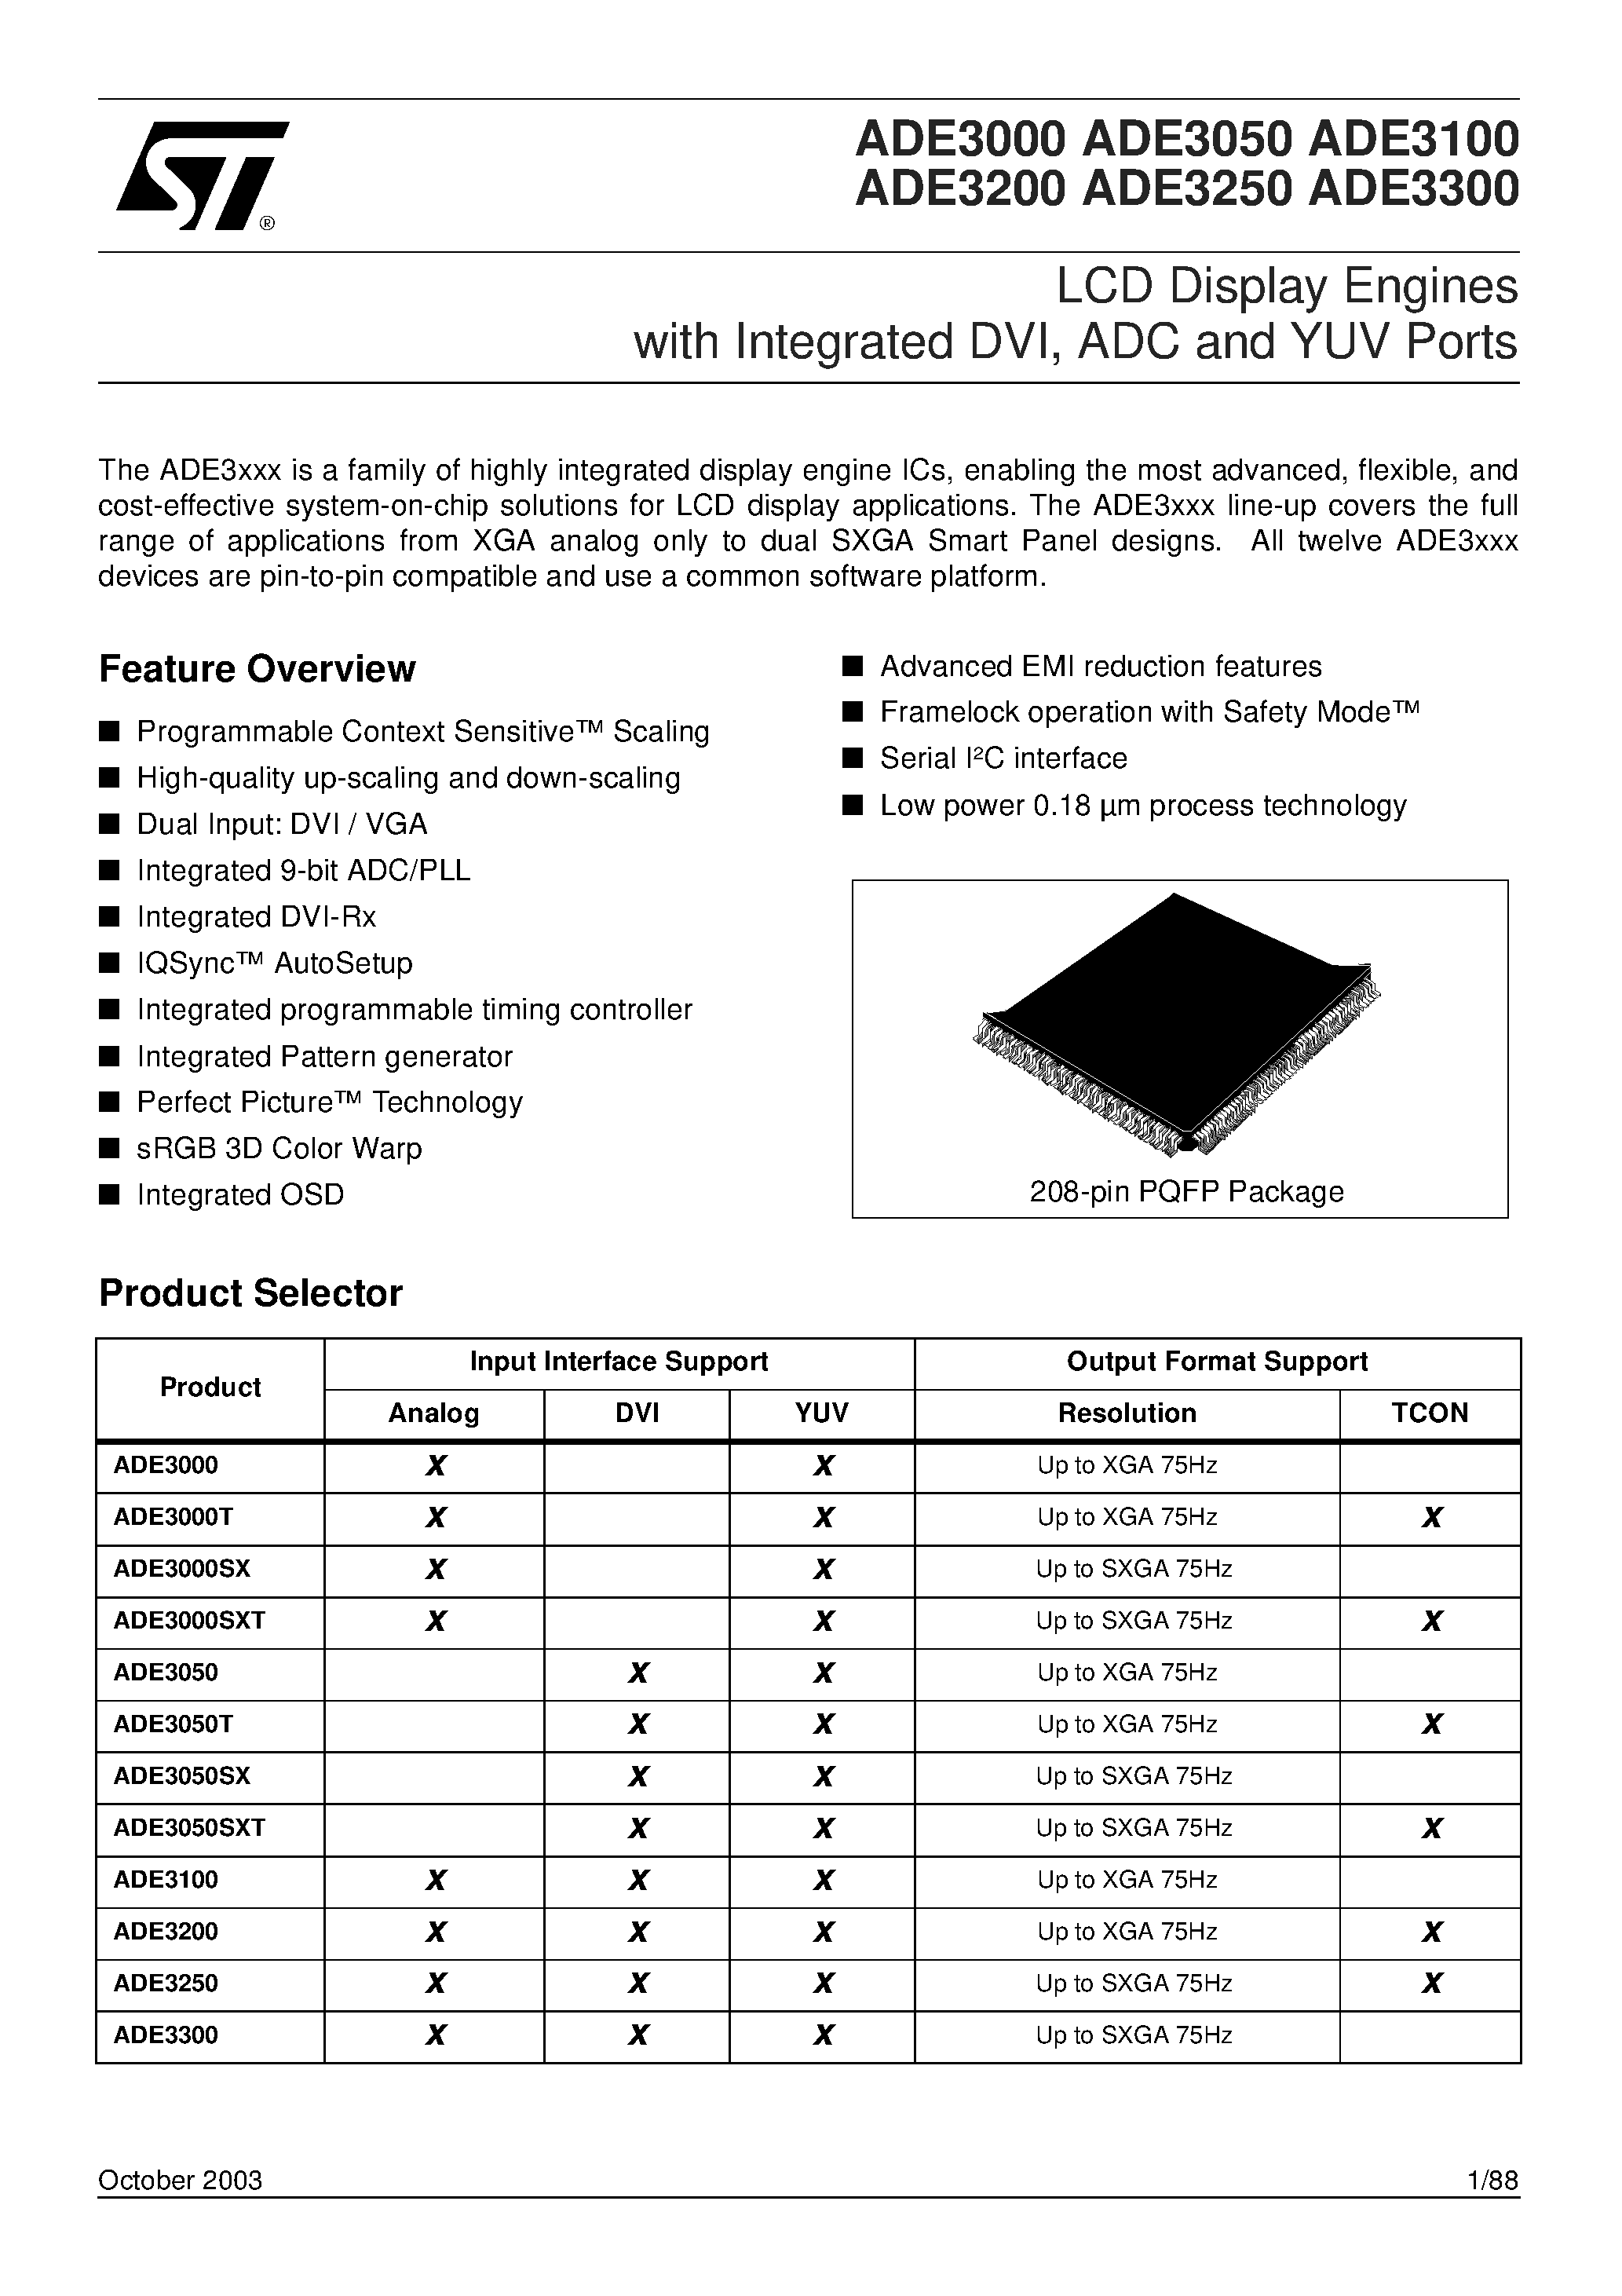 Datasheet ADE3050SXT - LCD Display Engines with Integrated DVI/ ADC and YUV Ports page 1